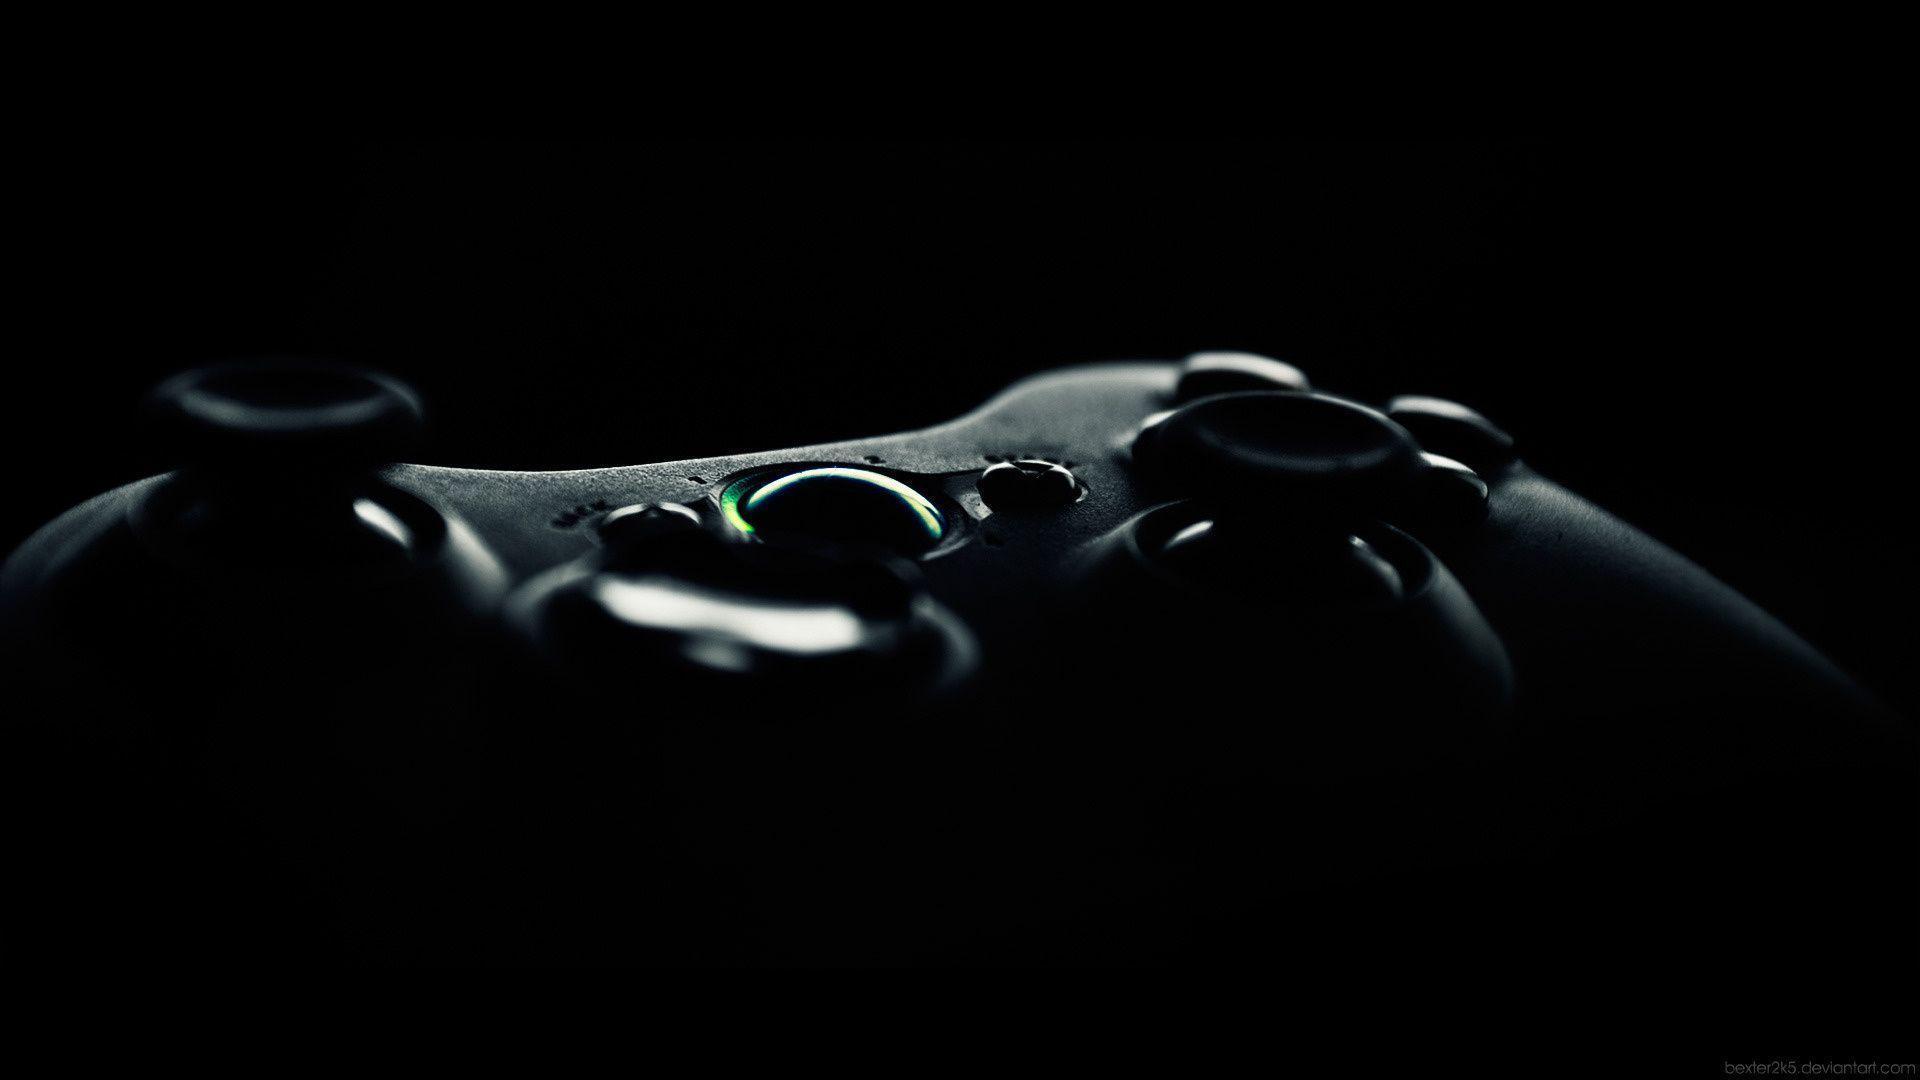 Xbox, The Joystick, Gamepad Wallpaper and Picture